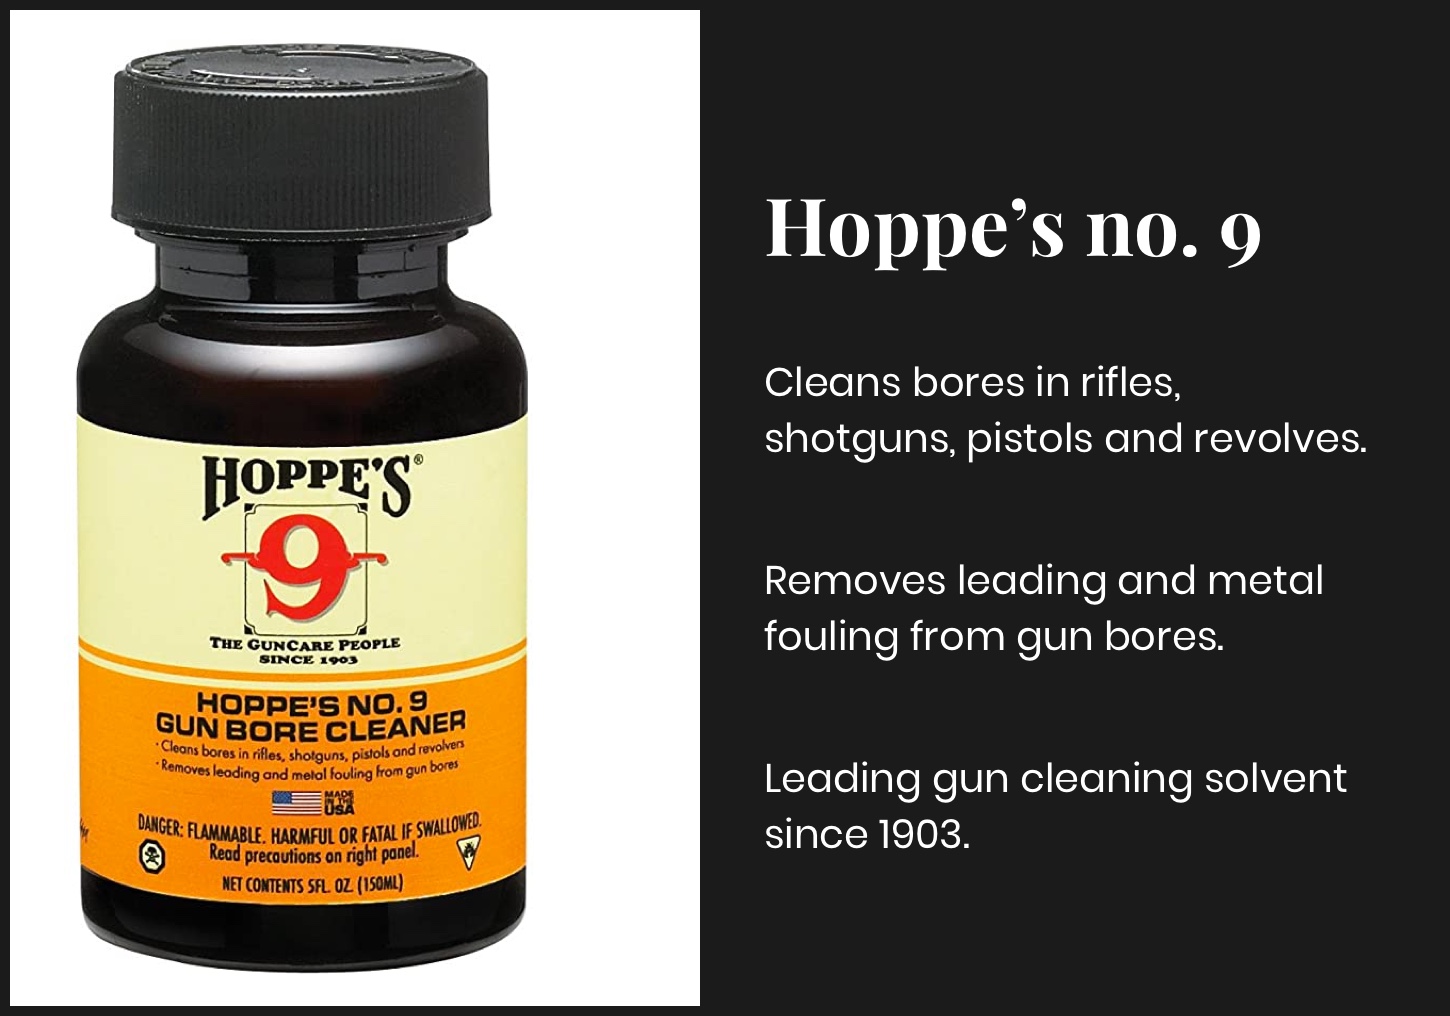 What is hoppe's no 9 cleaning solvent?